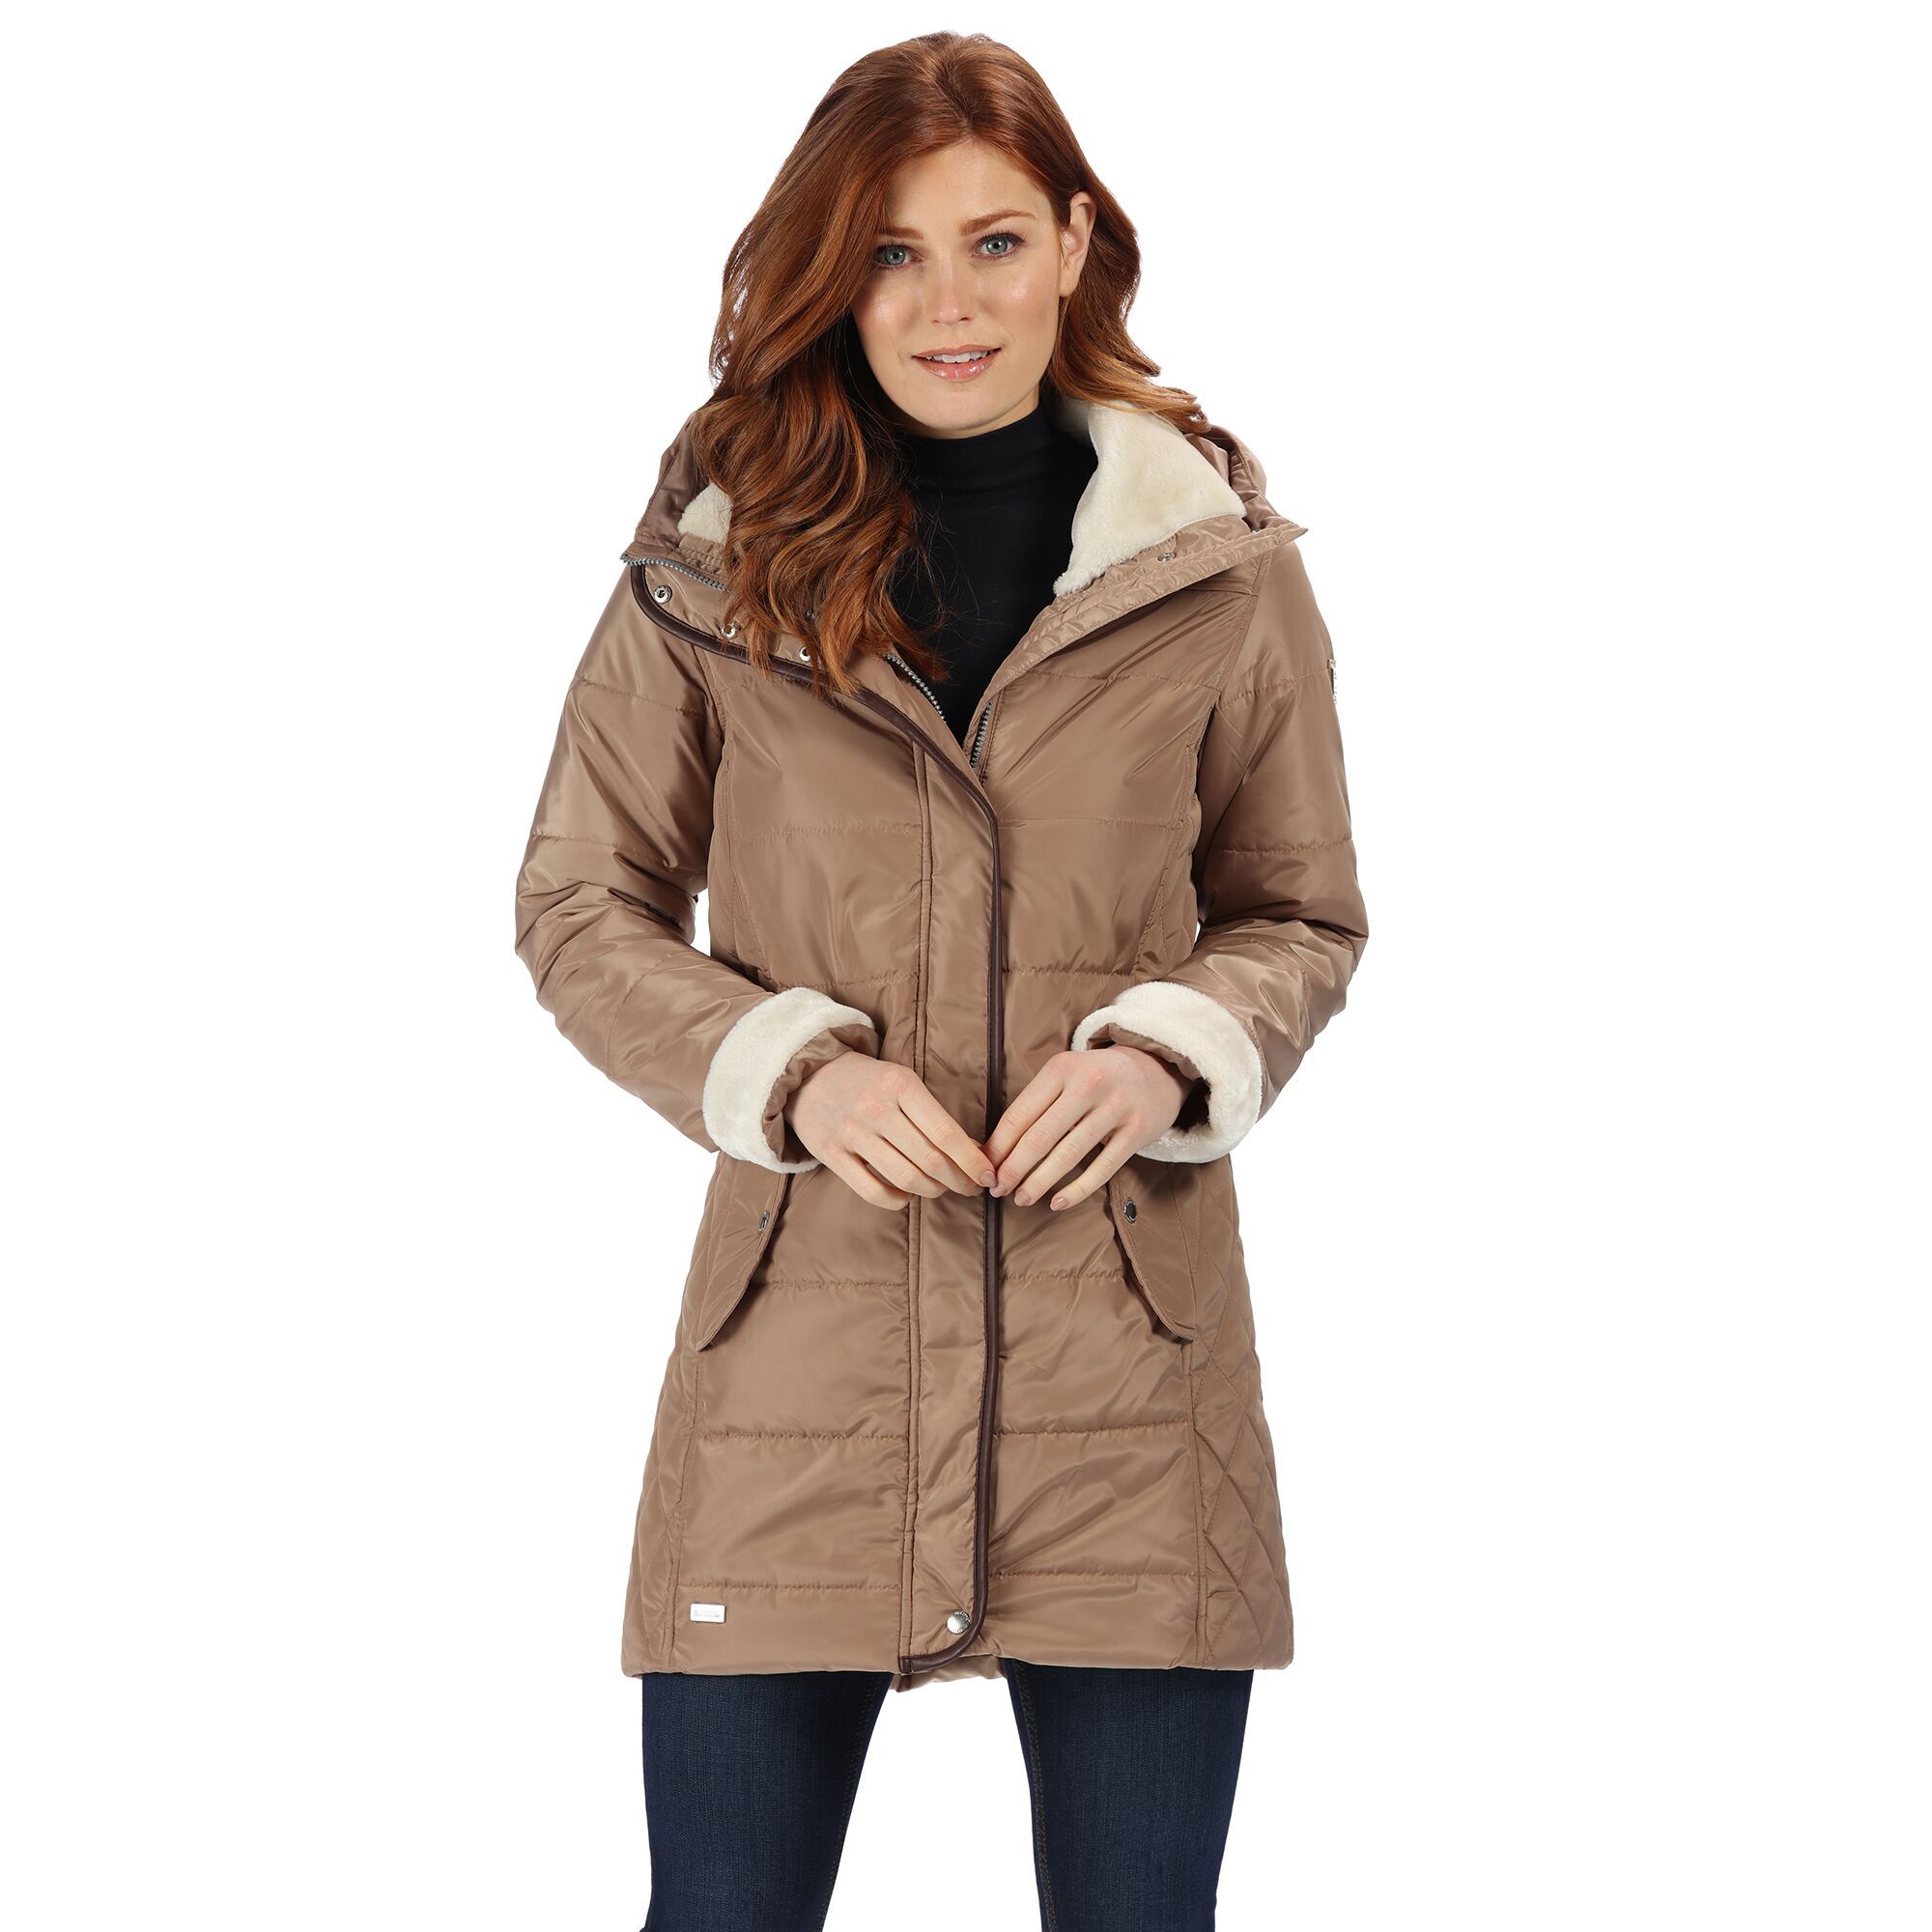 Material: 100% polyester. Long-line baffle jacket cut with a shapely silhouette. The outer uses high-shine, showerproof fabric while the inside is diamond quilted and baffle lined with Thermoguard insulation. With an expanding zip feature to the hood so you can wear it oversized. Features a lined collar and cuffs with soft faux-fur. With poppered pockets and the Regatta Outdoors badge on the left sleeve. Includes an internal security pocket and 2 lower pockets with flaps. Also features a 2 way centre front zip. Size (chest): (6 UK) 30in, (8 UK) 32in, (10 UK) 34in, (12 UK) 36in, (14 UK) 38in, (16 UK) 40in, (18 UK) 43in, (20 UK) 45in, (22 UK) 48in, (24 UK) 50in, (28 UK) 54in, (30 UK) 56in, (32 UK) 58in, (34 UK) 60in, (36 UK) 62in.